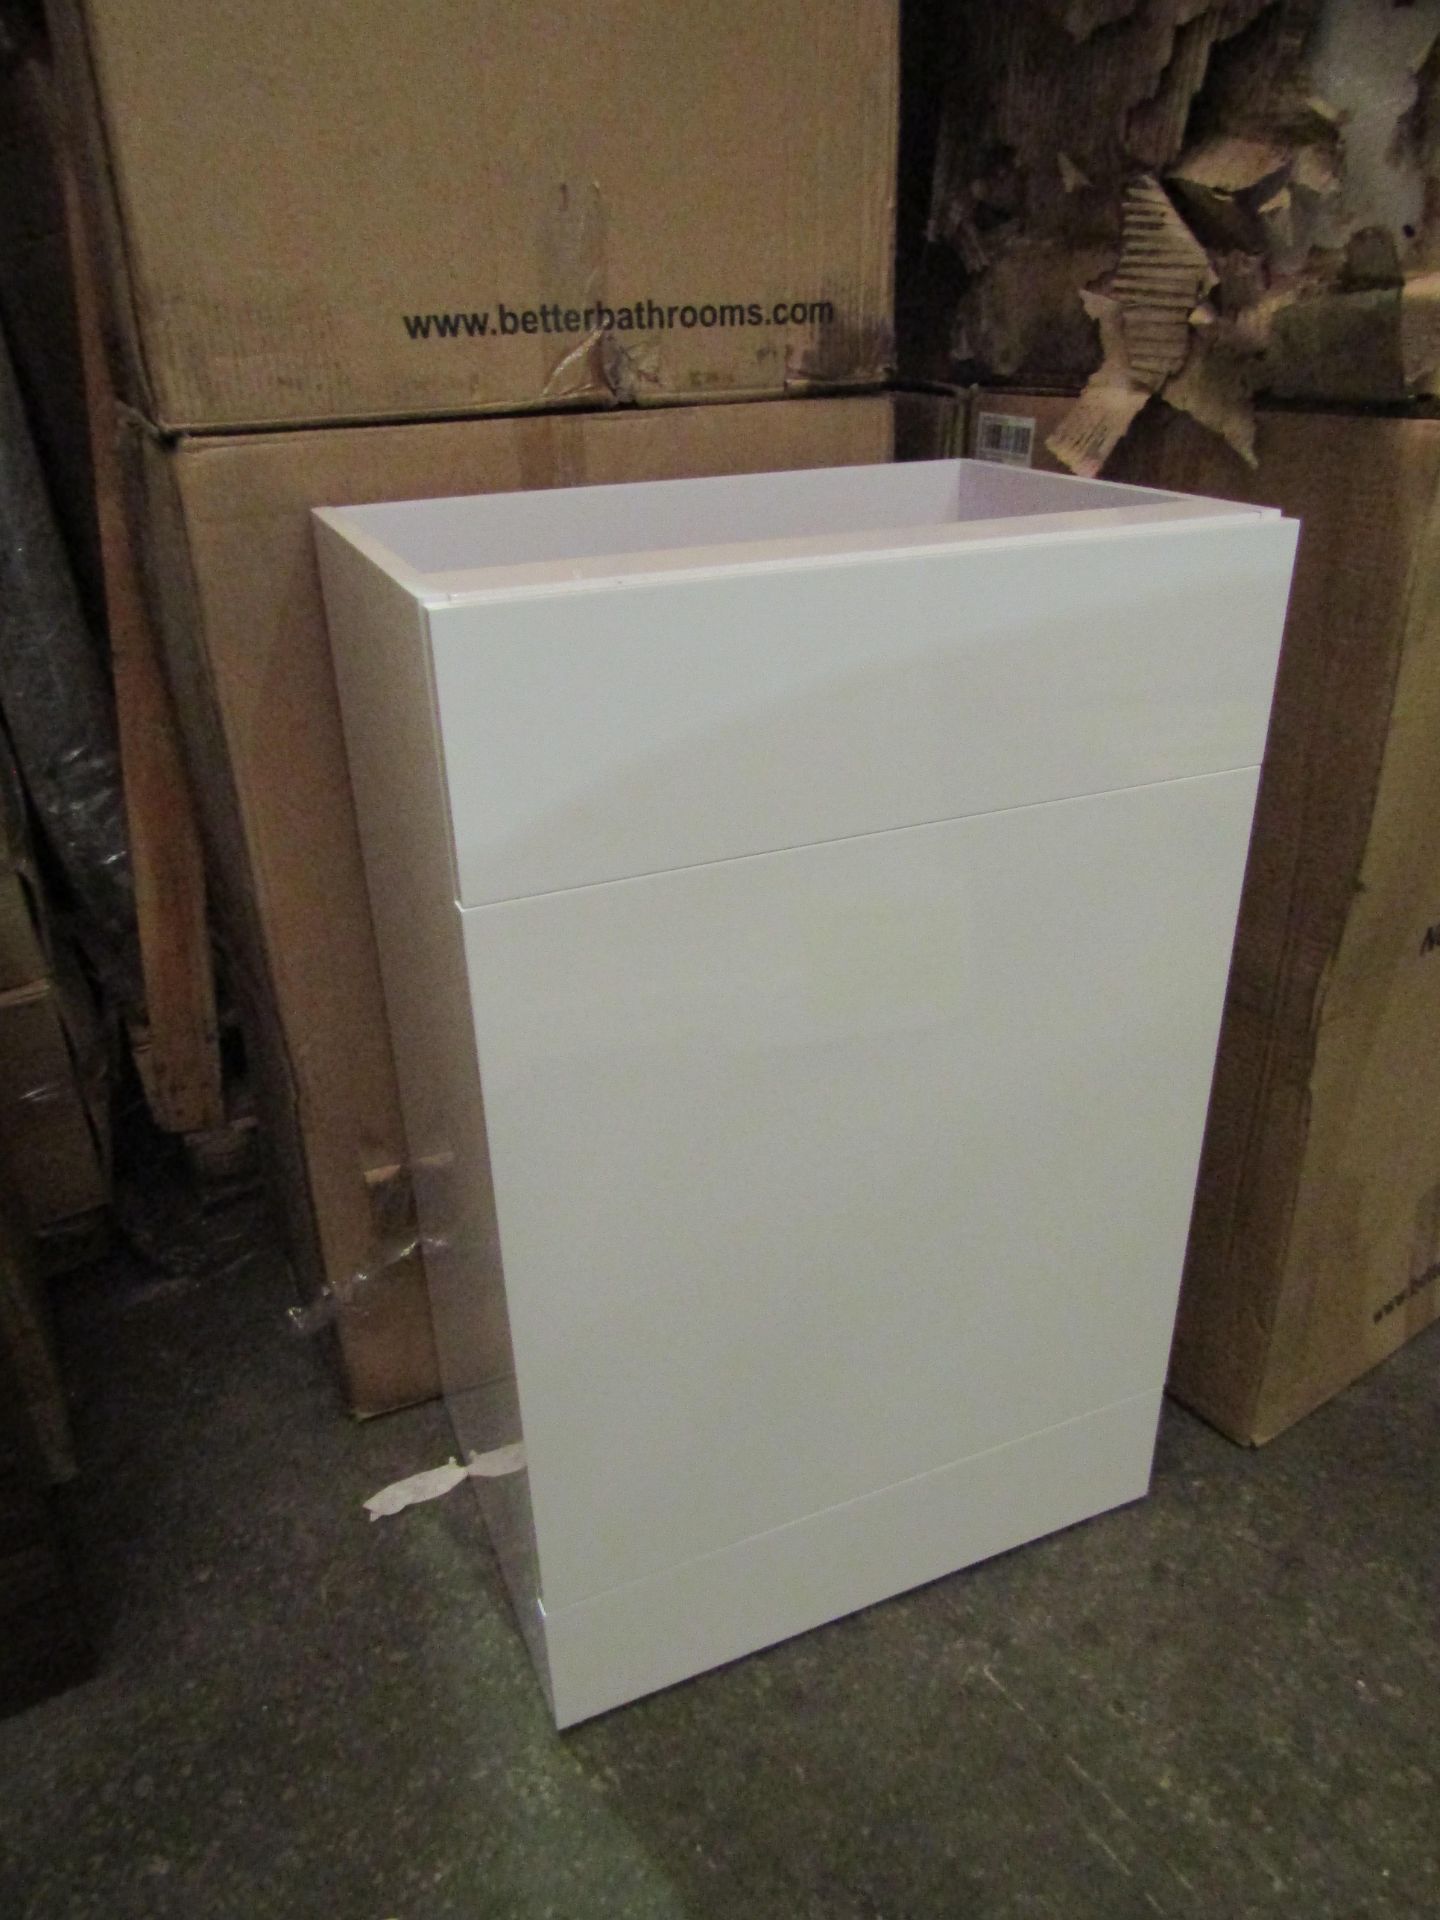 New Kirkwood WC Side Cabinet Gloss White 120cm - New & Boxed.